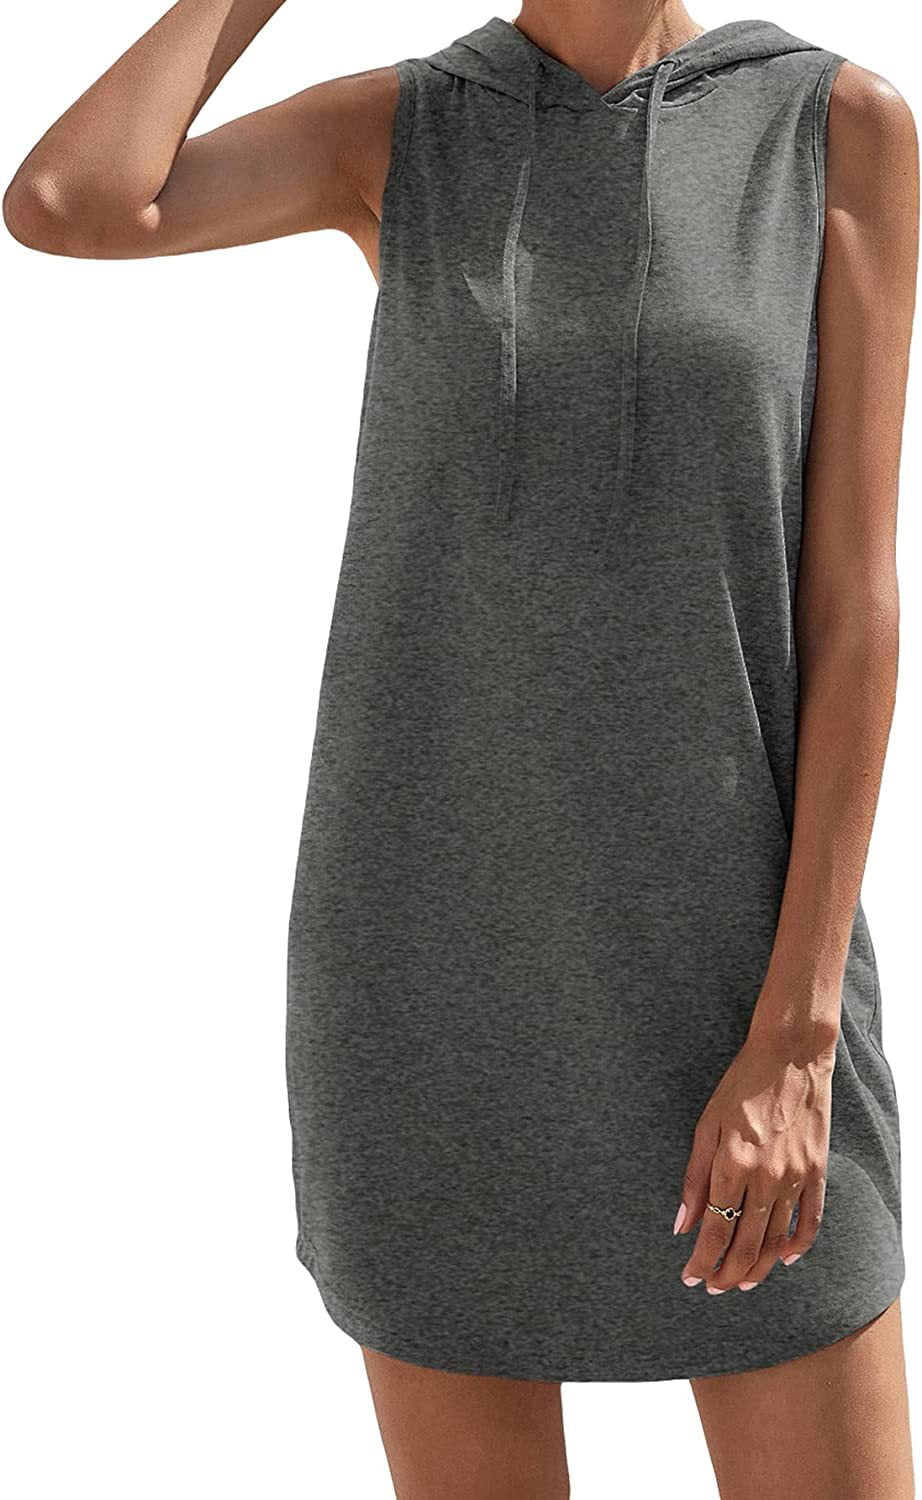 Cami Dresses- Sporty Chic Solid Color Sheath Dress with Tie-Neck & Drawstring Collar- Dark Gray- Chuzko Women Clothing